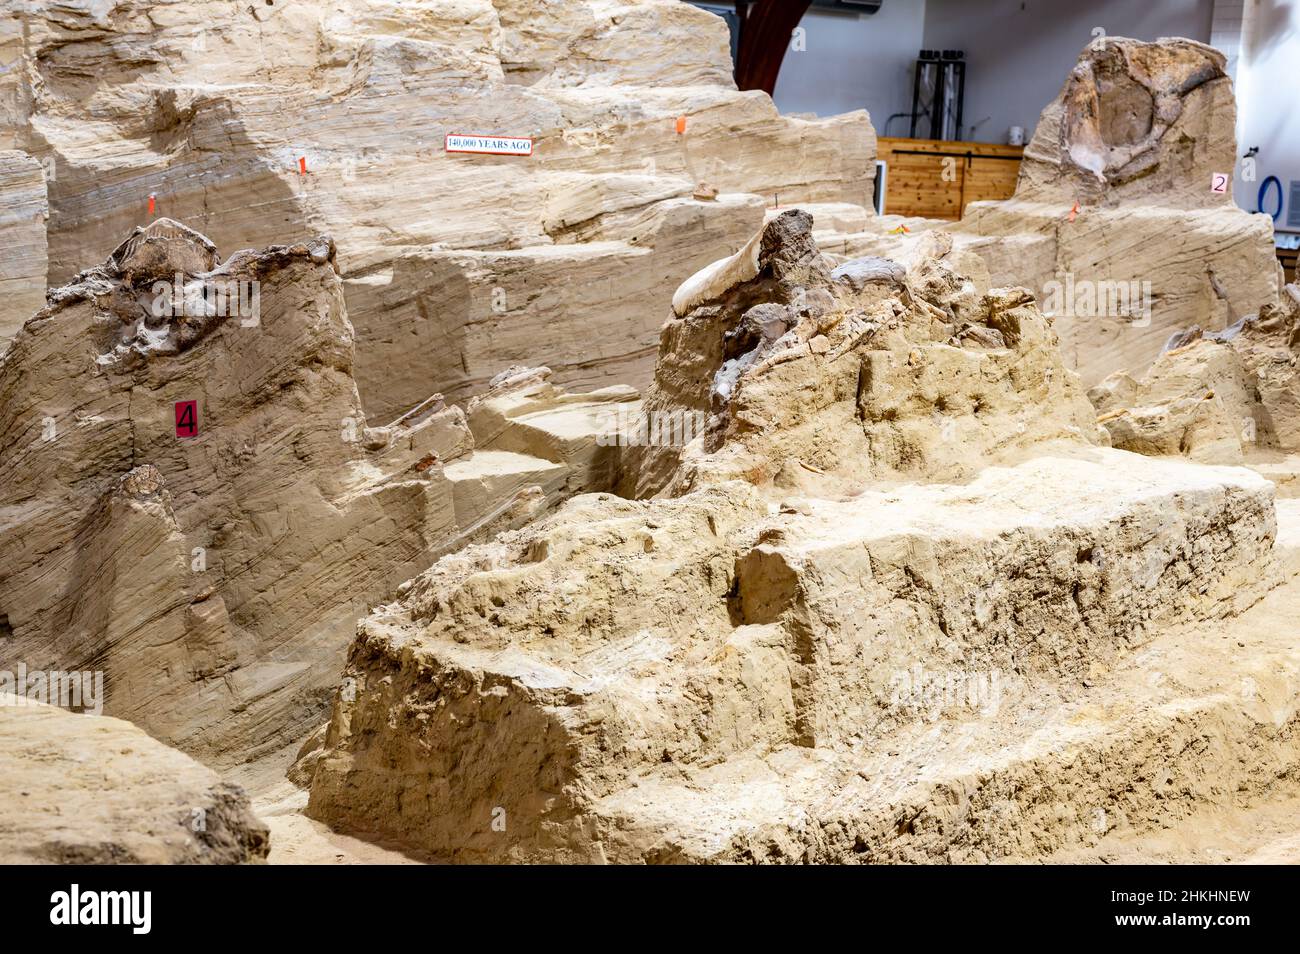 Hot Springs, South Dakota -10.2021: bones being excavated at the Mammoth Dig site caused by a collapsed sink hole Stock Photo